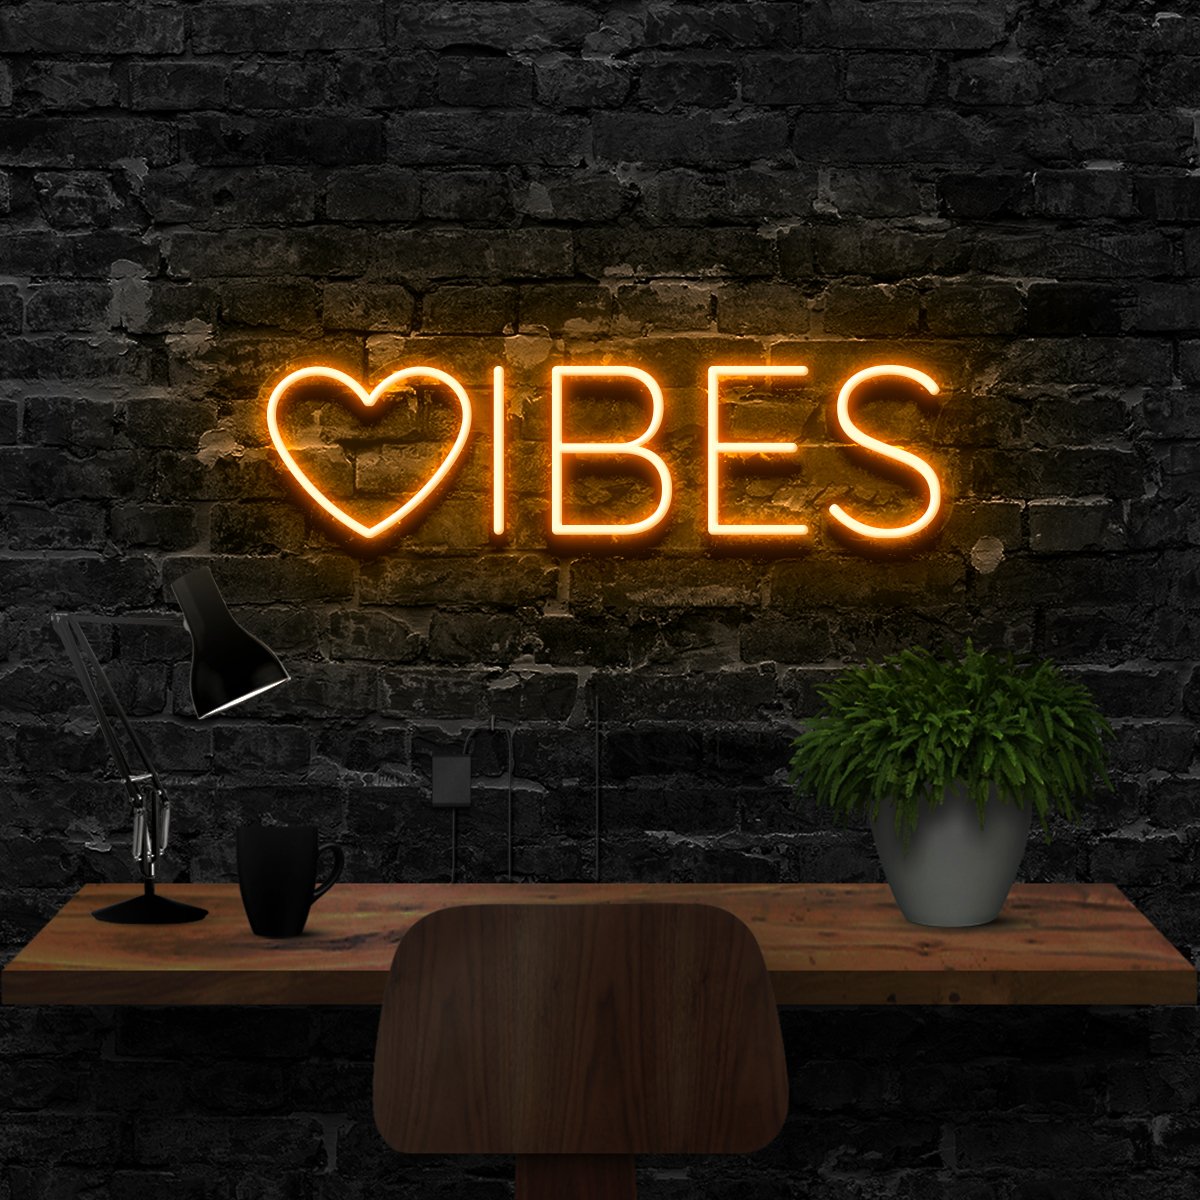 "VIBES" Neon Sign 40cm (1.3ft) / Orange / LED Neon by Neon Icons